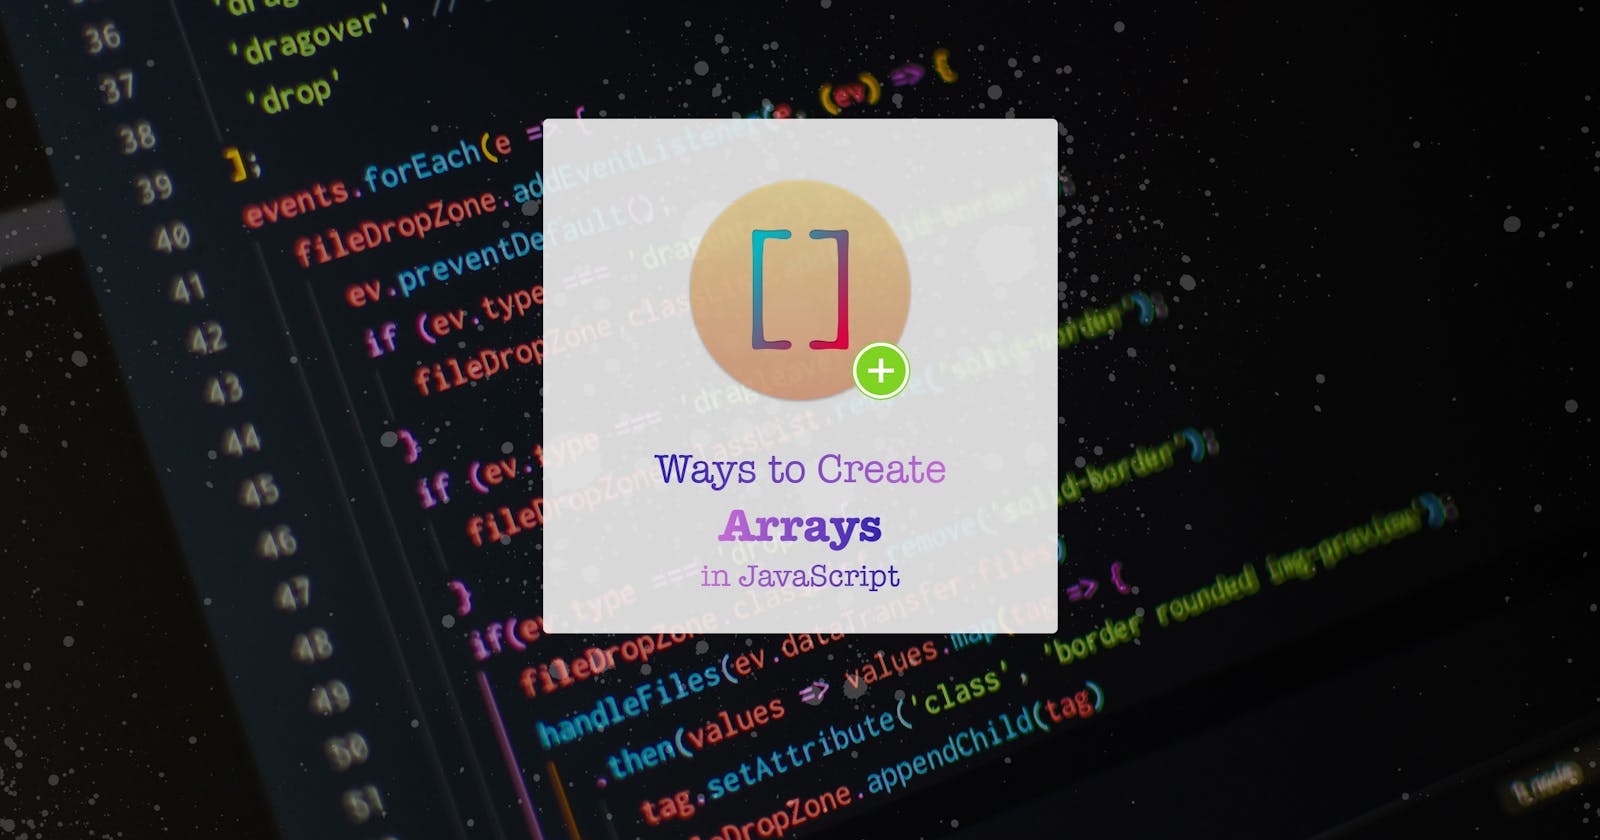 Different ways to create Arrays in JavaScript